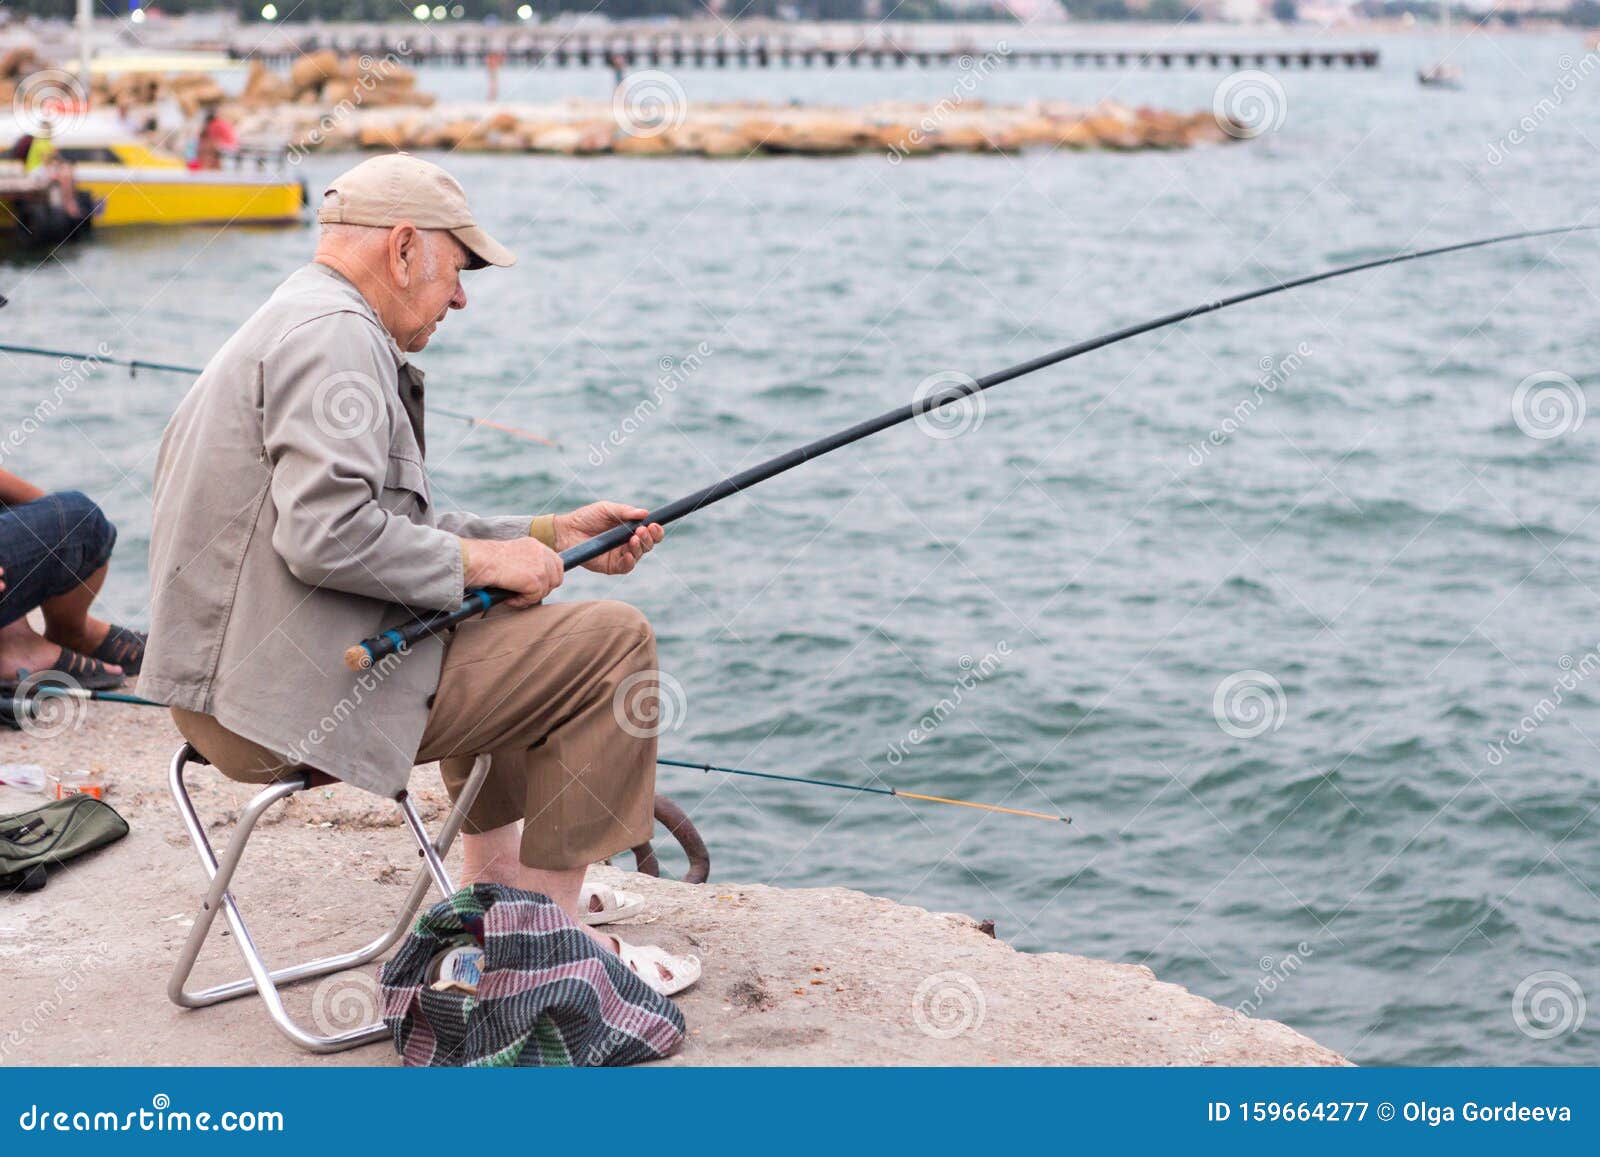 Old Man Fishing on a Fishing Rod in the Sea, in the Evening Stock Image -  Image of minimalism, calm: 159664277